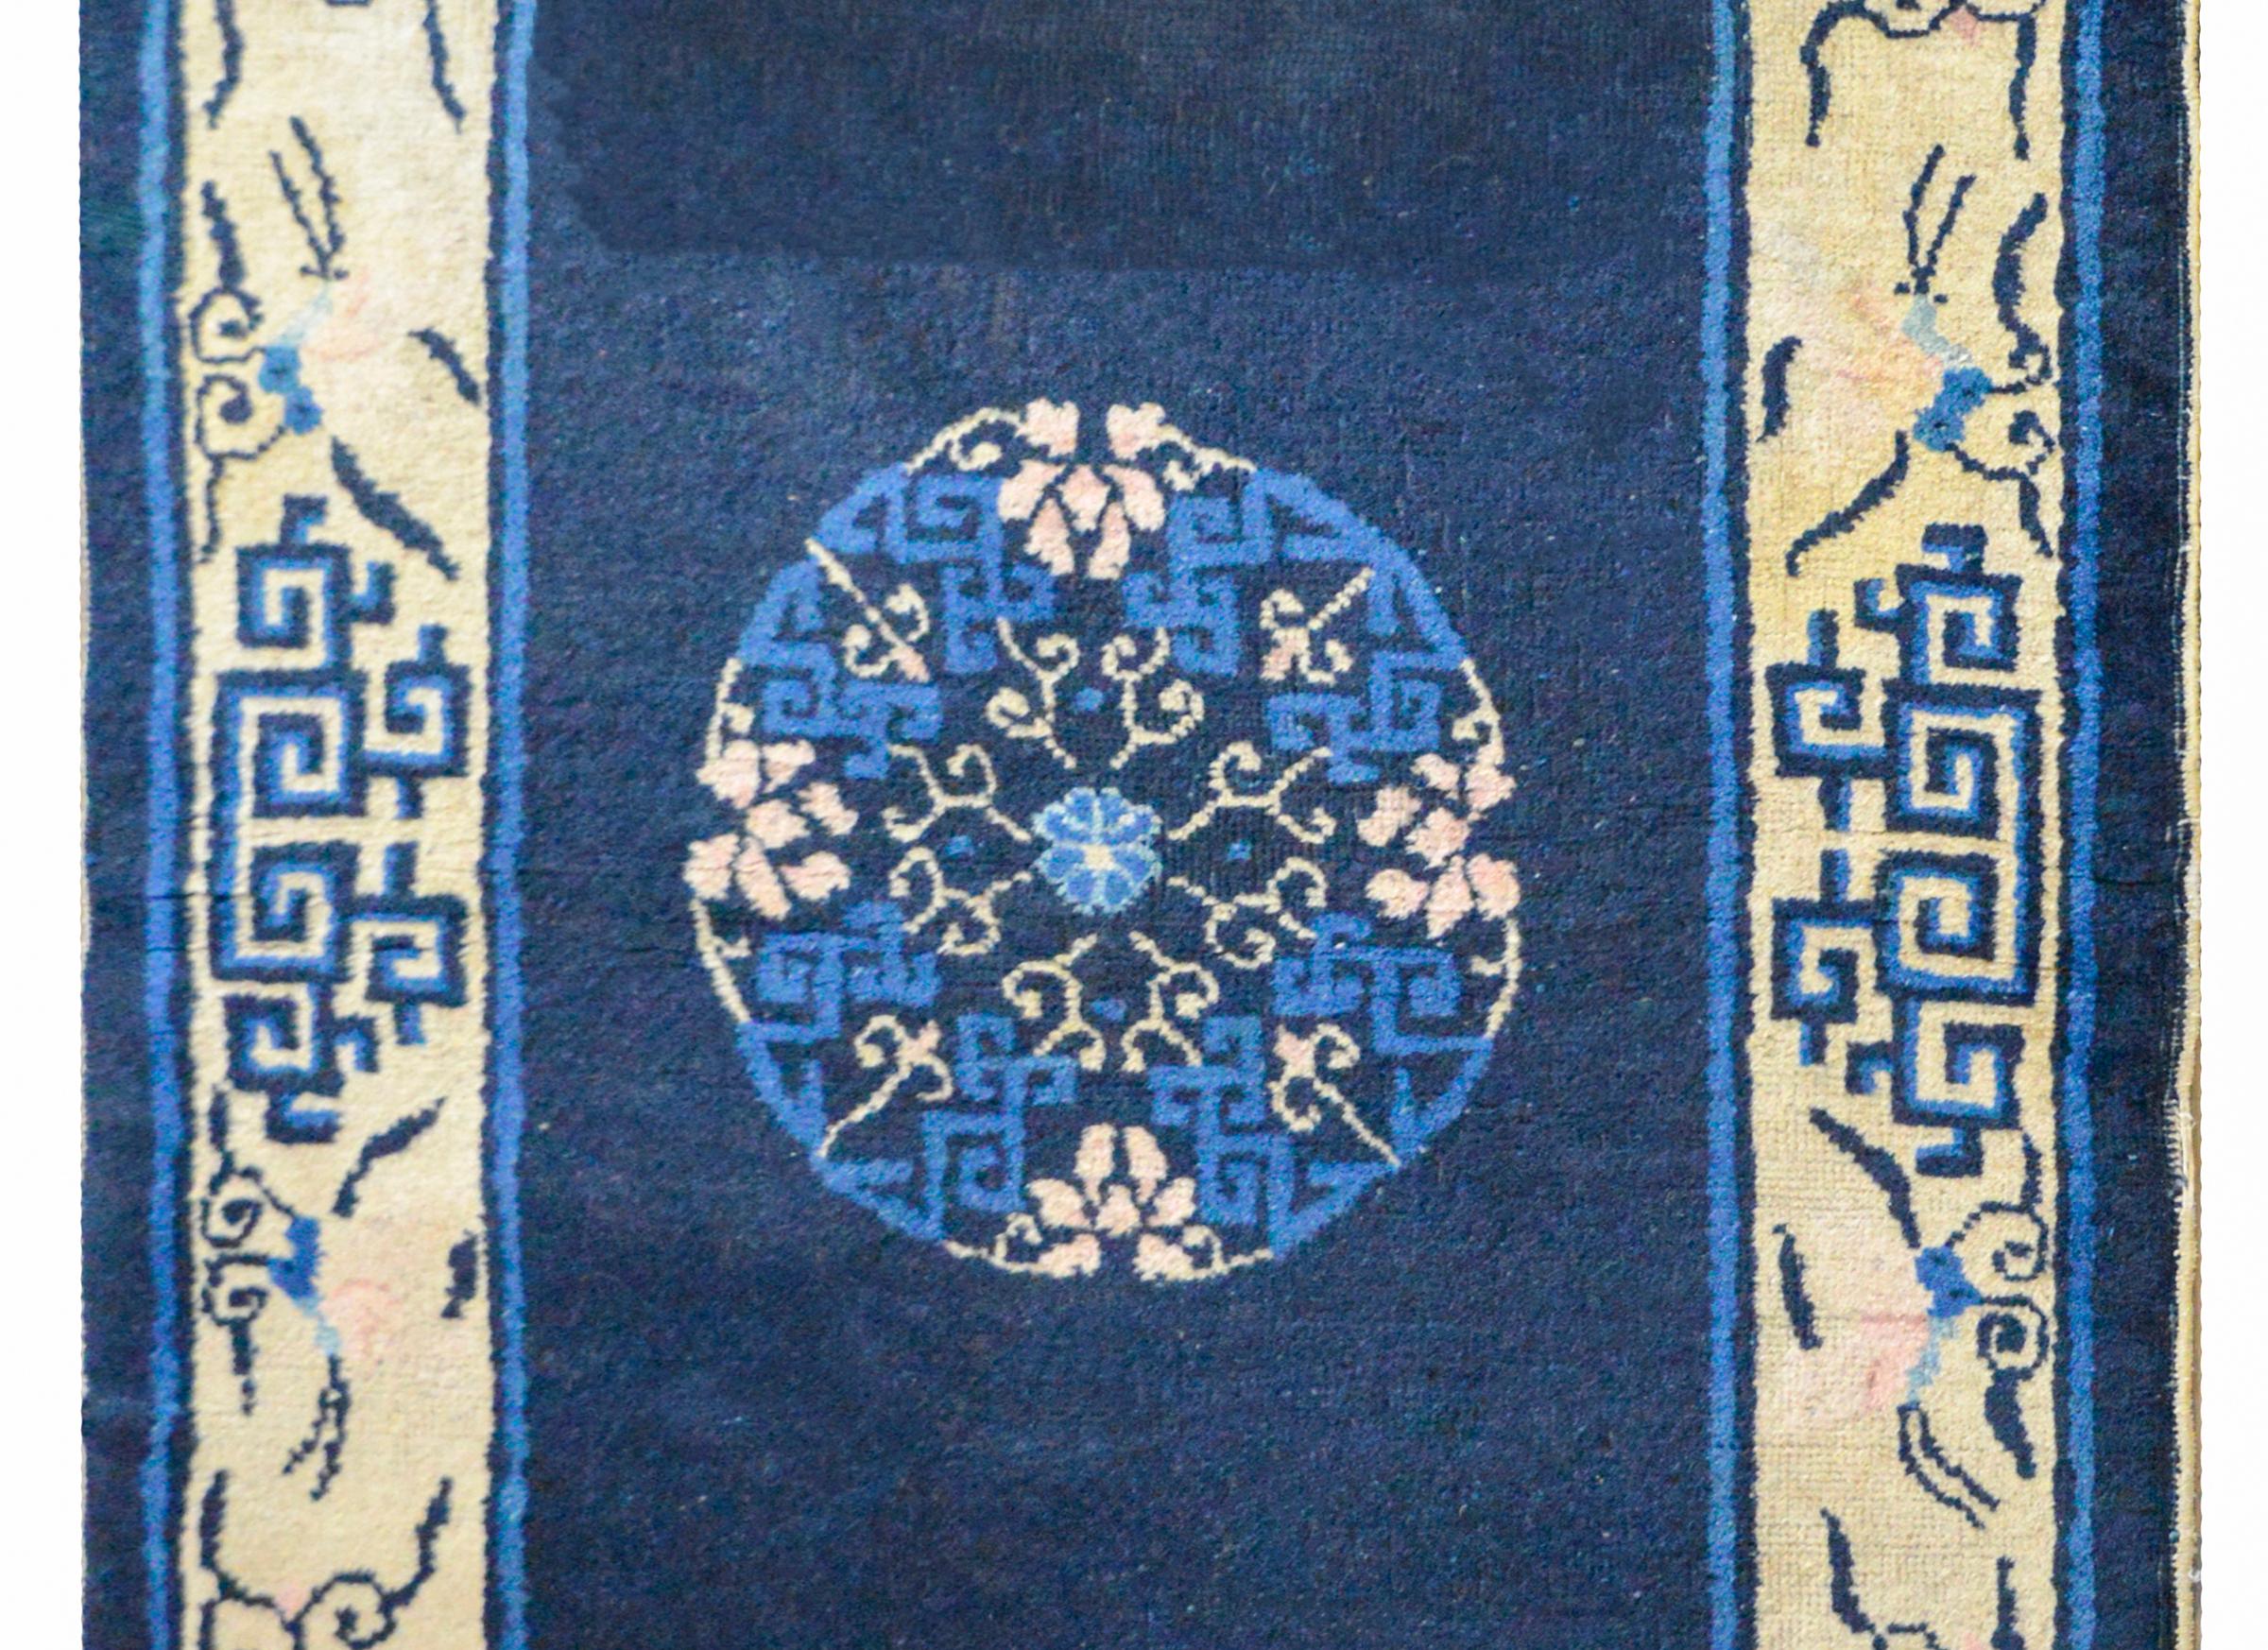 A beautiful 20th century Chinese Peking rug with a central floral medallion against a dark abrash indigo background, and surrounded by a wide stylized lotus and scrolling vine pattern. The field is abrash, meaning the variation in colors is